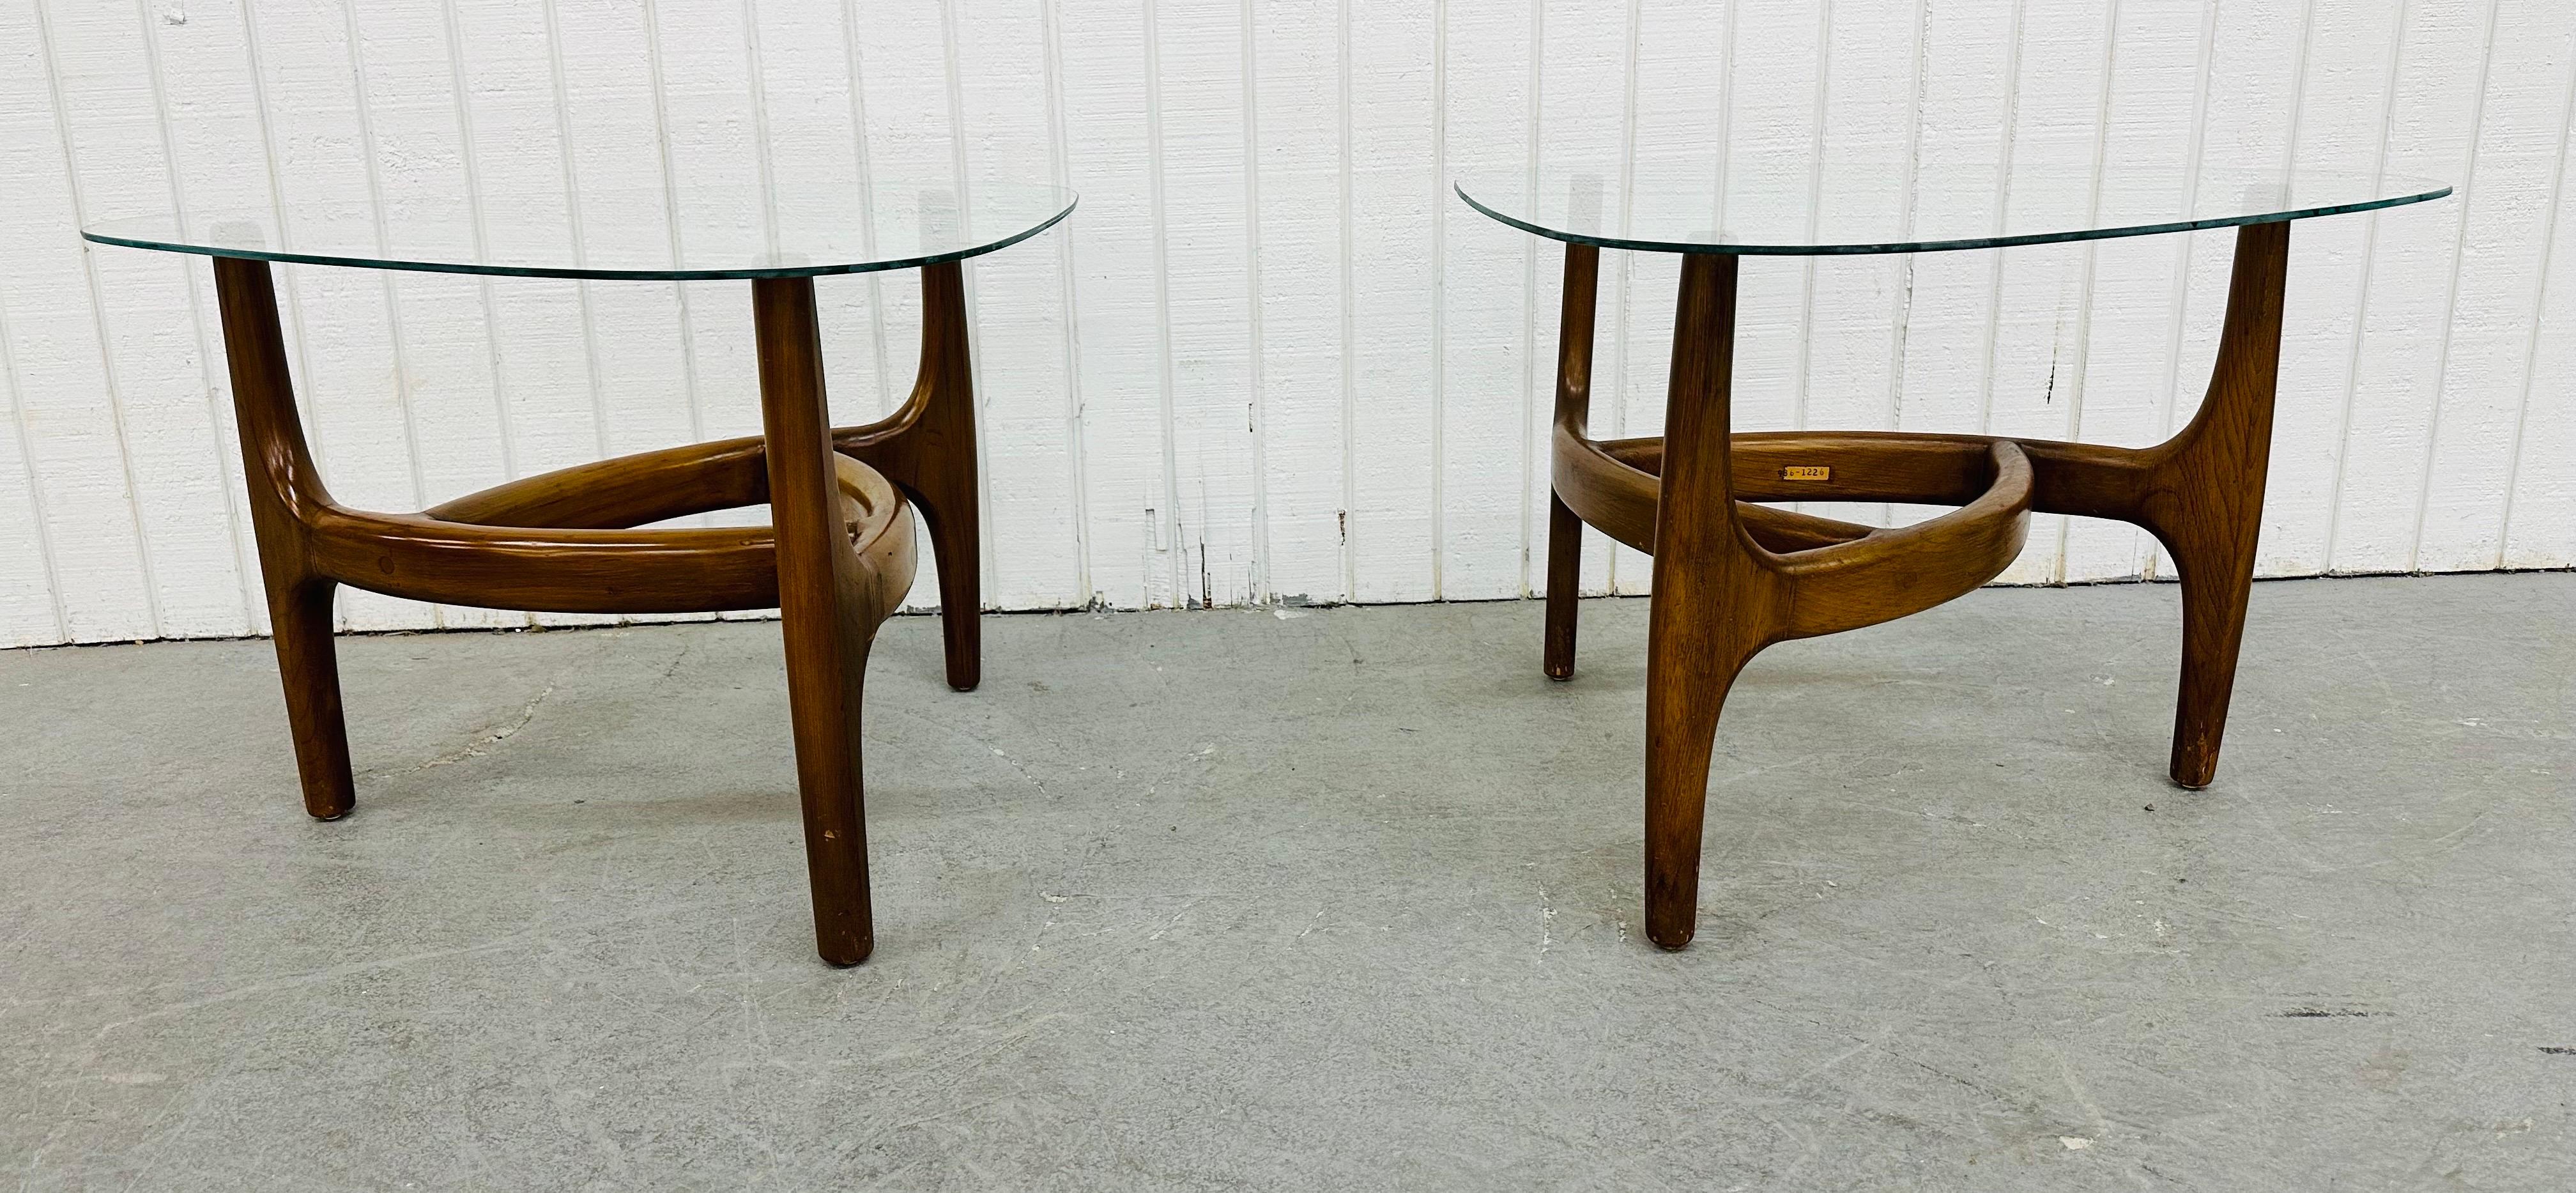 Mid-Century Modern Sculpted Walnut Glass Top Side Tables - Set of 2 In Good Condition For Sale In Clarksboro, NJ